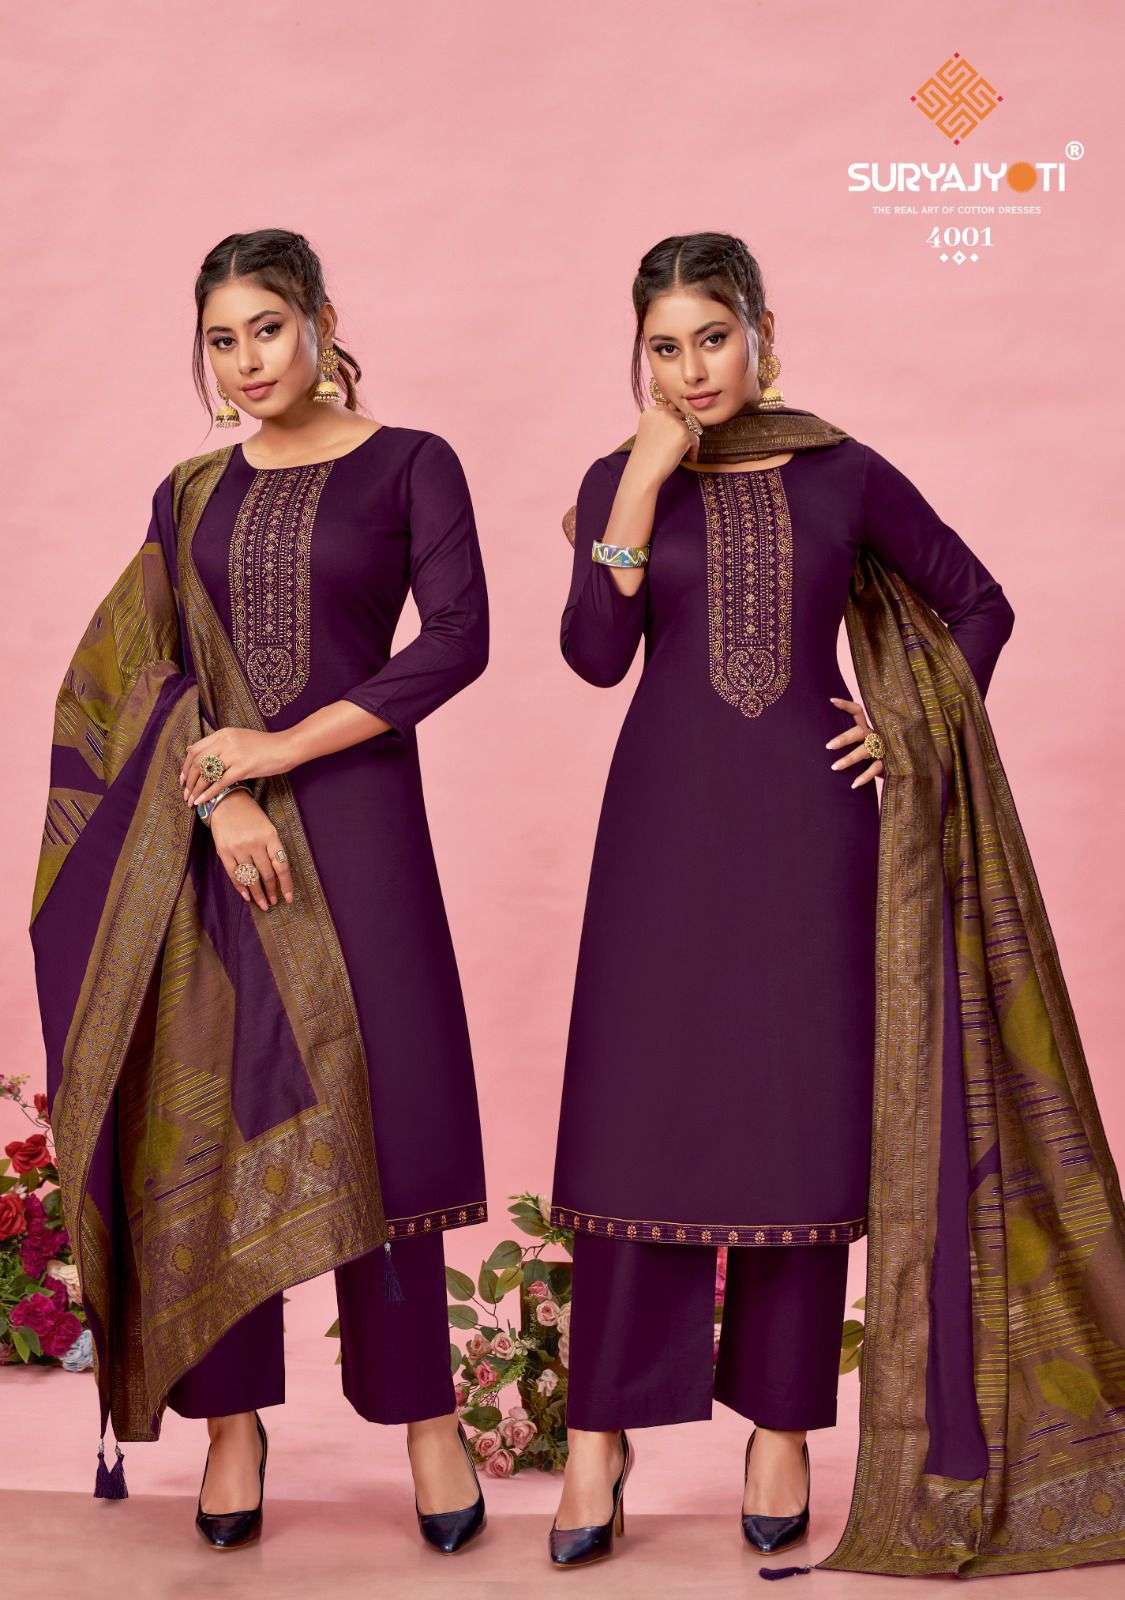  Suryajyoti Naadirah Vol-4 Pure Jaam Satin Cotton With Neck And Border Embroidery Work On Wholesale